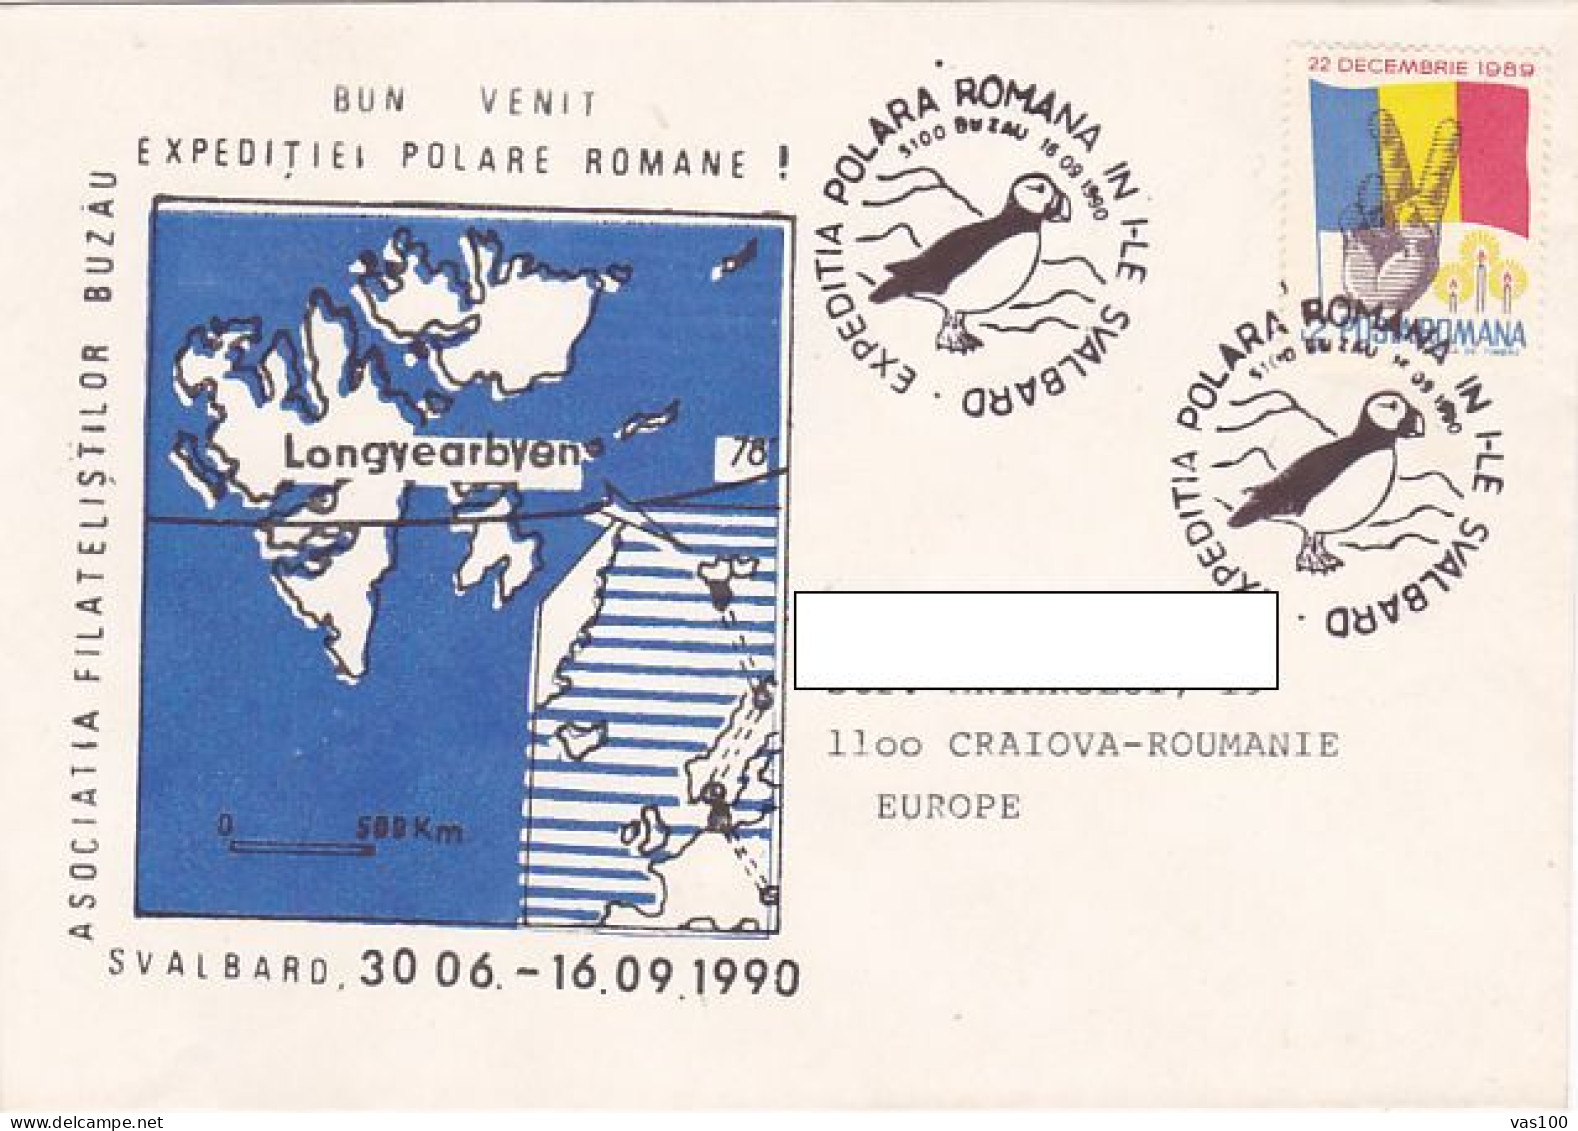 NORTH POLE, ARCTIC EXPEDITION, ROMANIAN EXPEDITION IN SVALBARD, PUFFIN, SPECIAL COVER, 1990, ROMANIA - Arktis Expeditionen